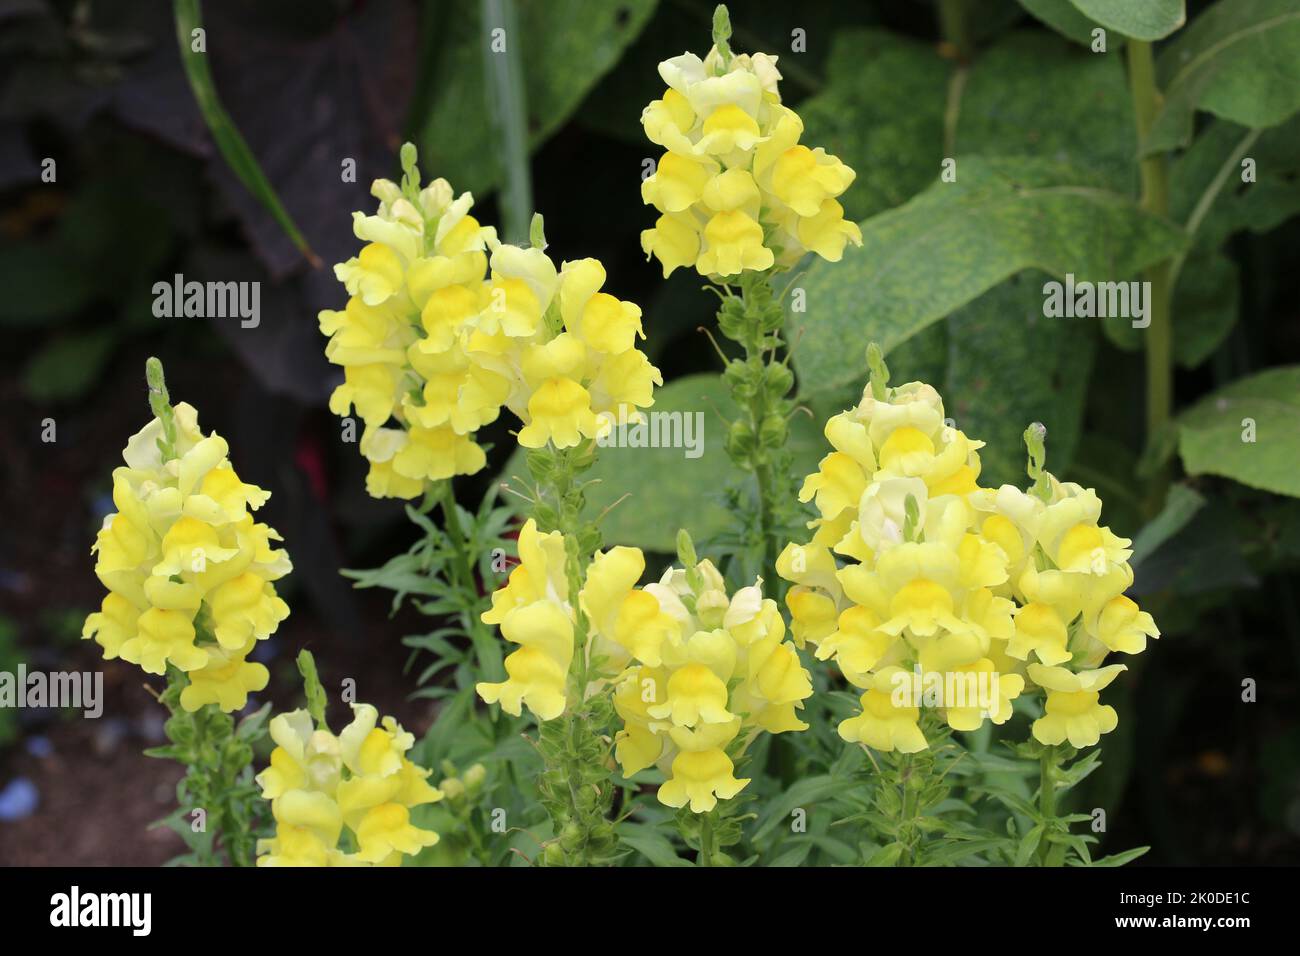 Flowering spikes of yellow snapdragon, Antirrhinum species, flowers with a blurred background of leaves. Stock Photo